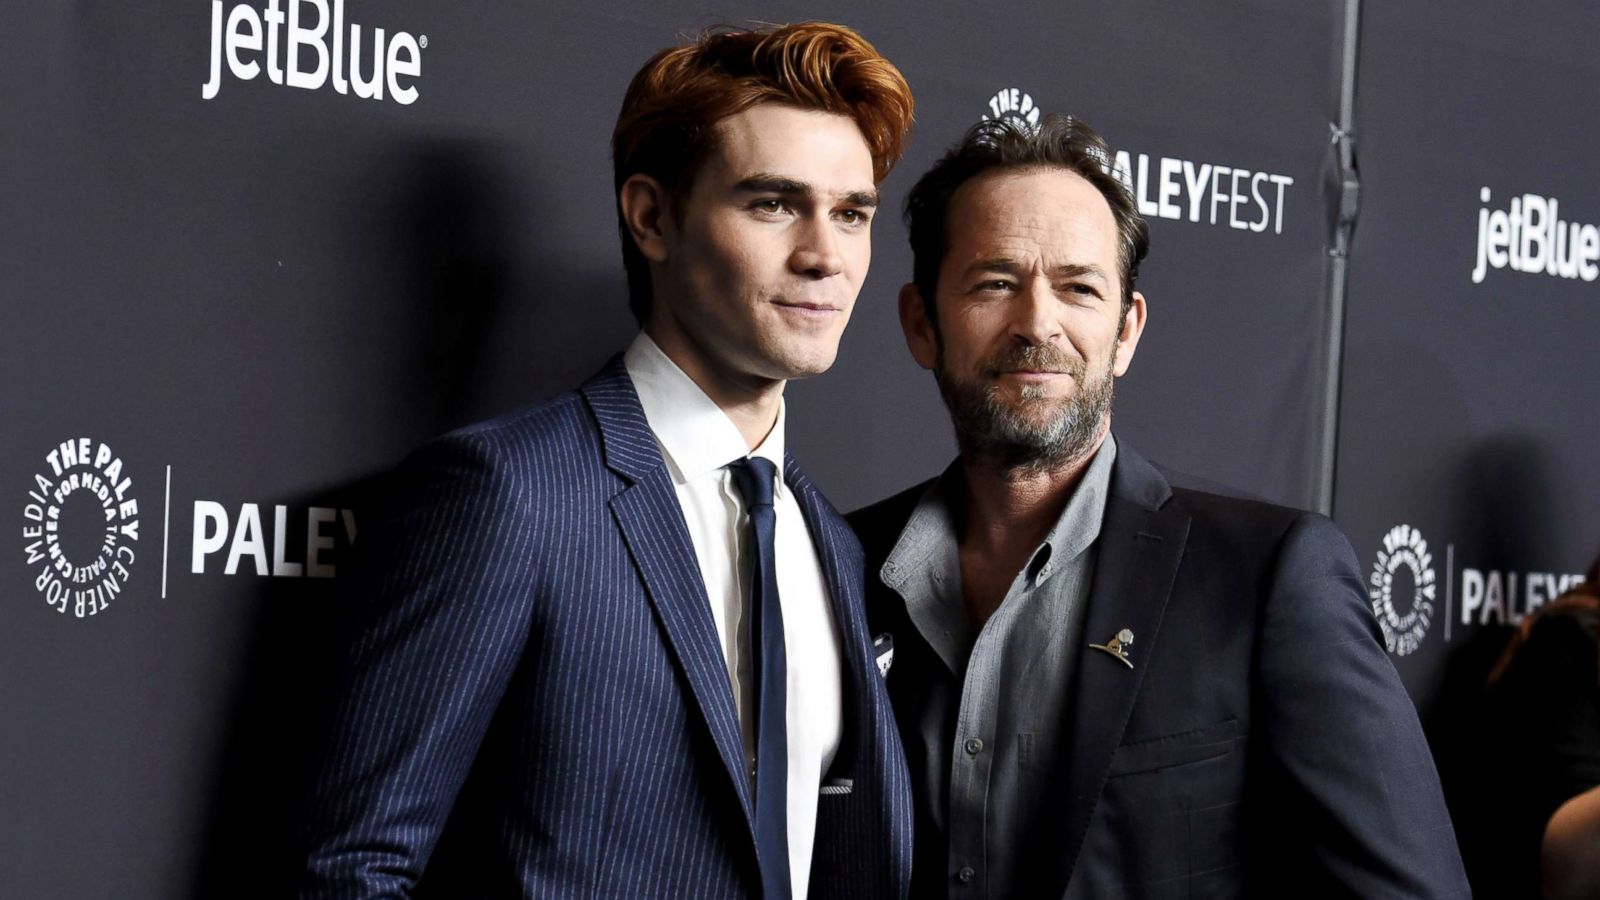 PHOTO: KJ Apa and Luke Perry attend an event on March 25, 2018, in Hollywood, Calif.